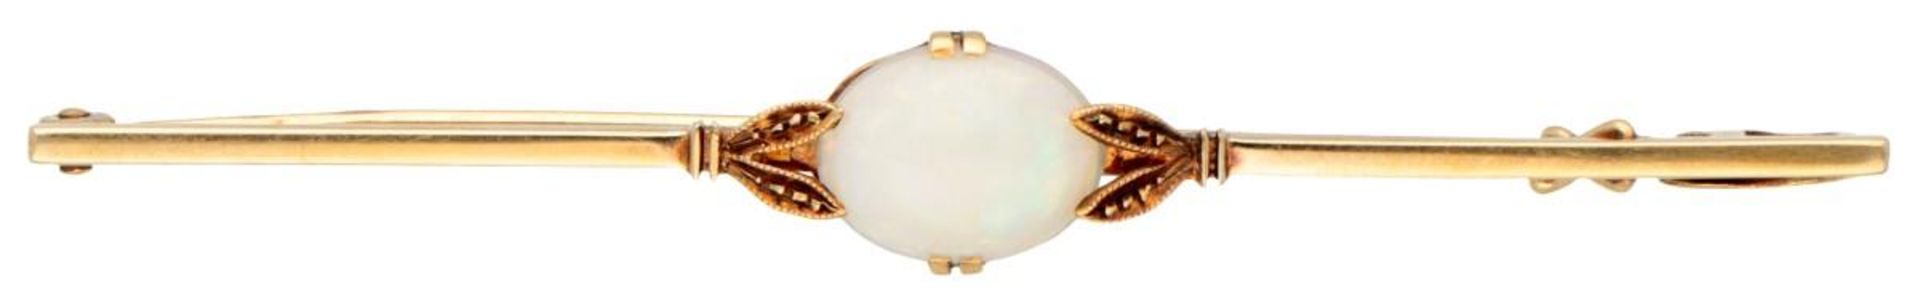 Vintage 14K. yellow gold brooch set with approx. 1.04 ct. opal.